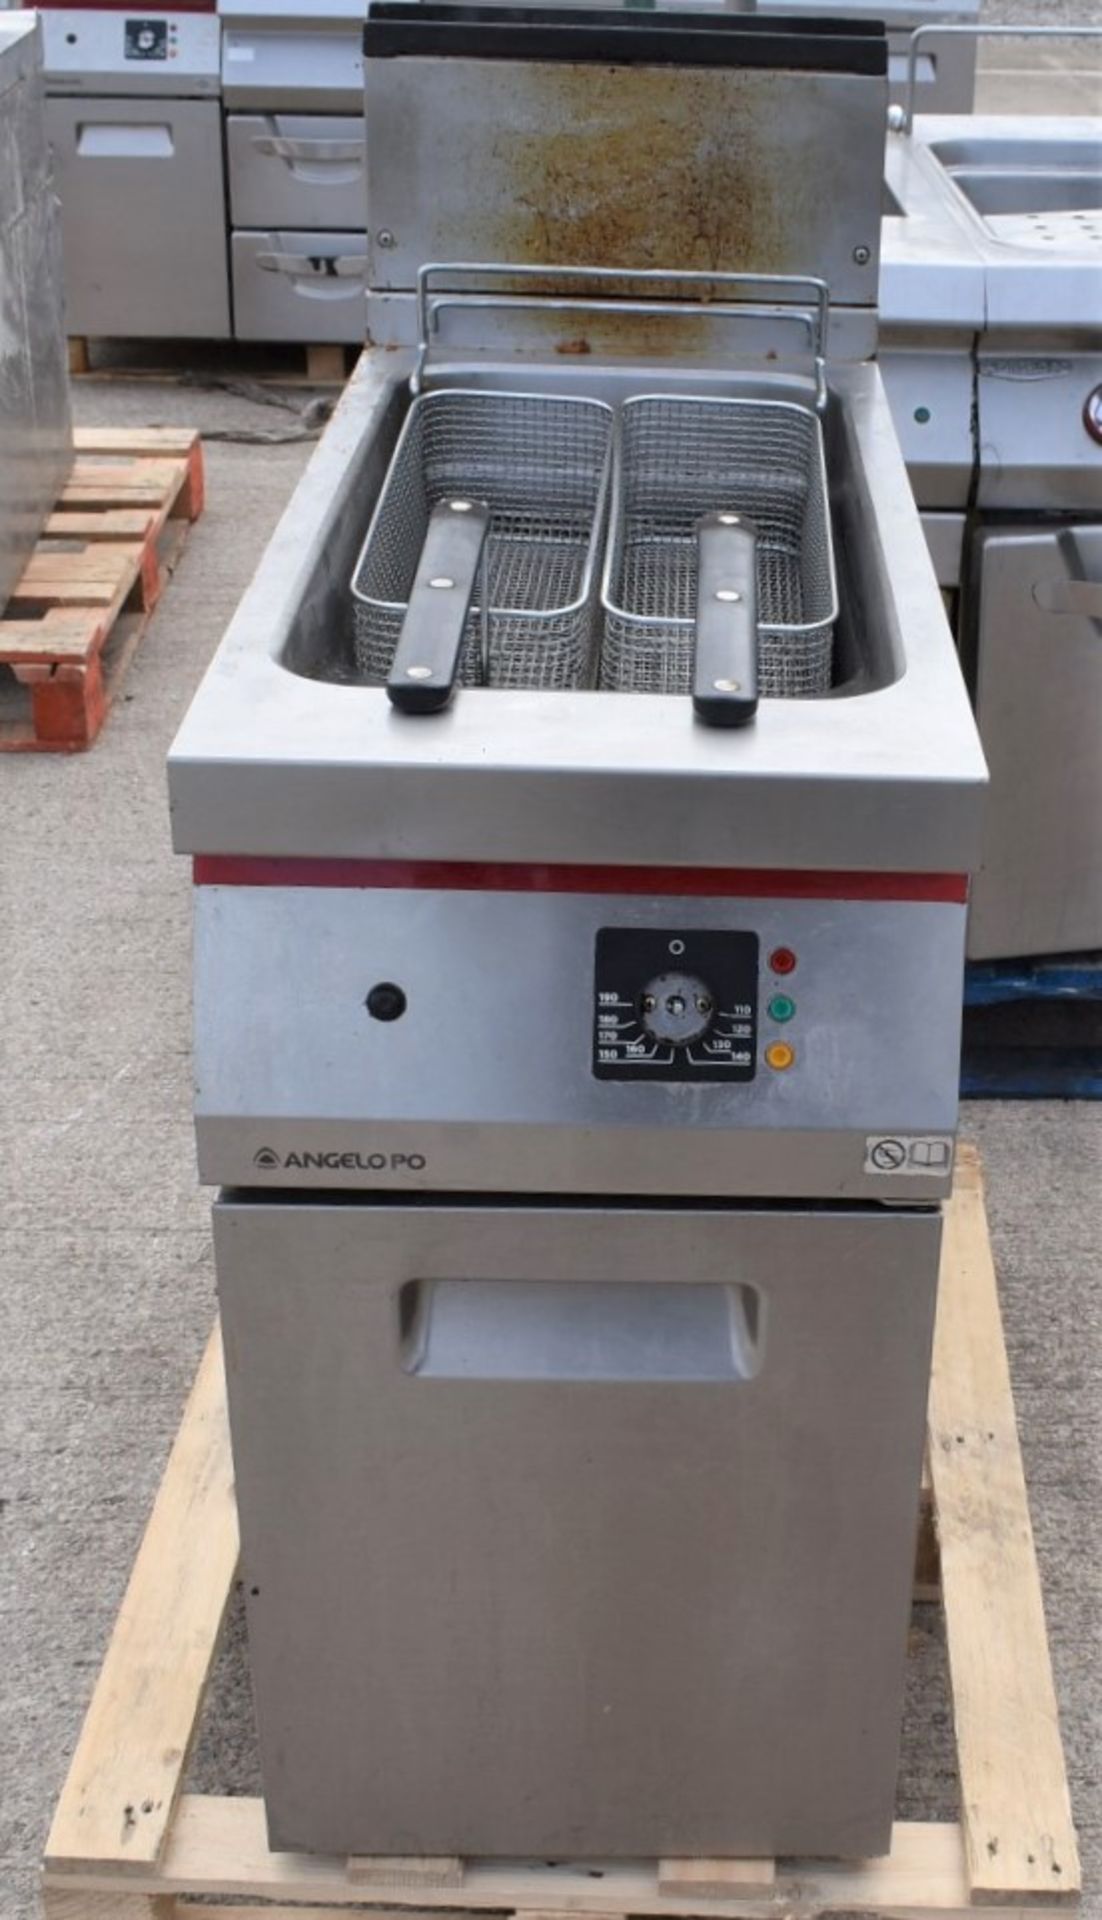 1 x Angelo Po Single Tank Gas Fryer With Baskets - AISI 304 Stainless Steel Finish - Latest Design - Image 5 of 5